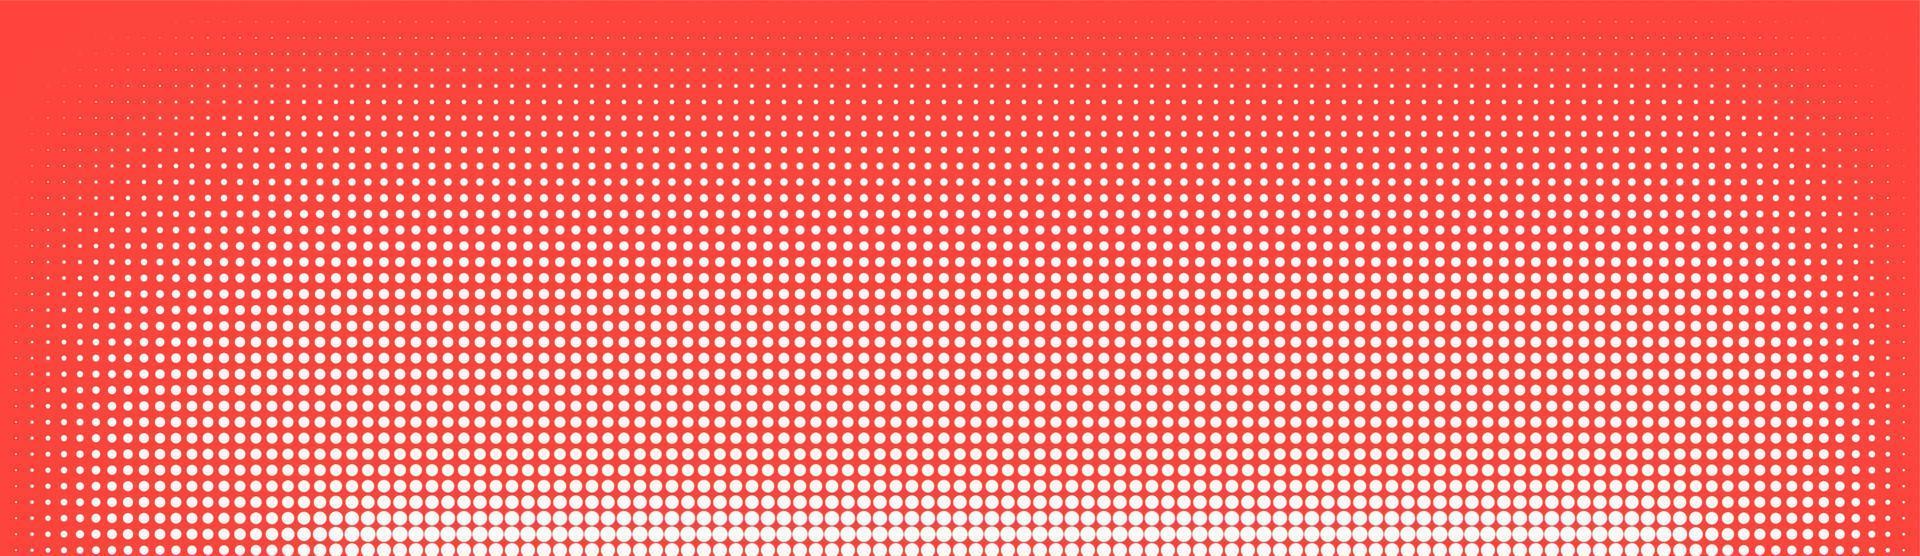 Halftone in abstract style. Geometric retro banner vector texture. Modern print. White and red background. Light effect